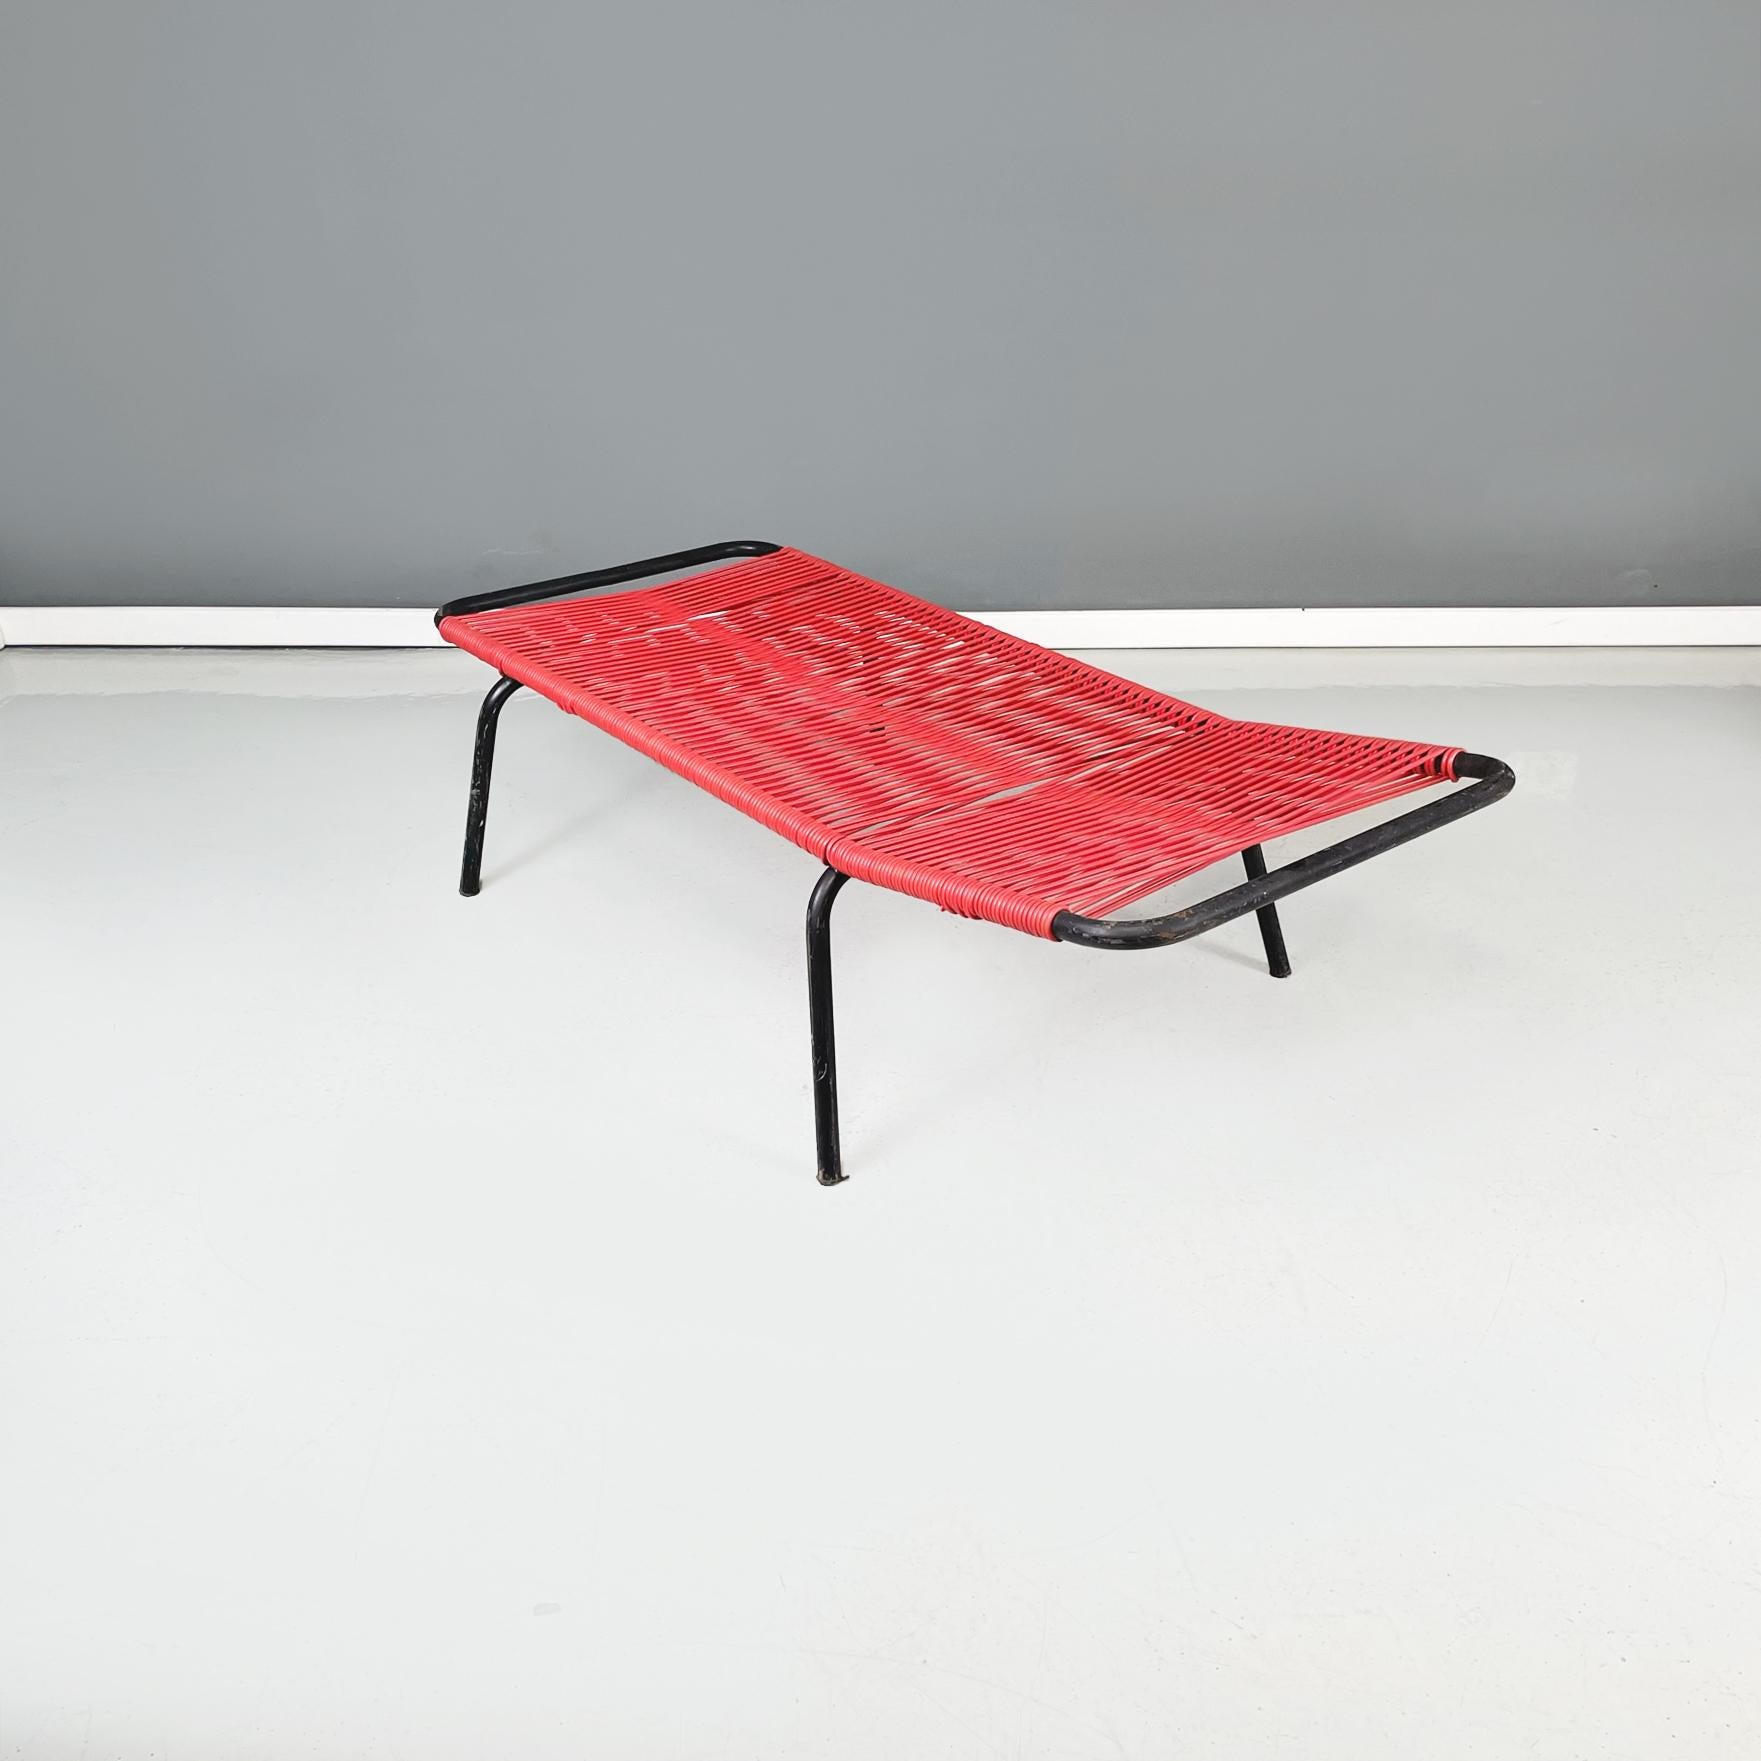 Italian midcentury beach chair in red scooby plastic and black metal, 1960s
Beach chair, small or for children, in black painted metal and red scooby. The external structure is in tubular, while inside there are a series of intertwined red plastic